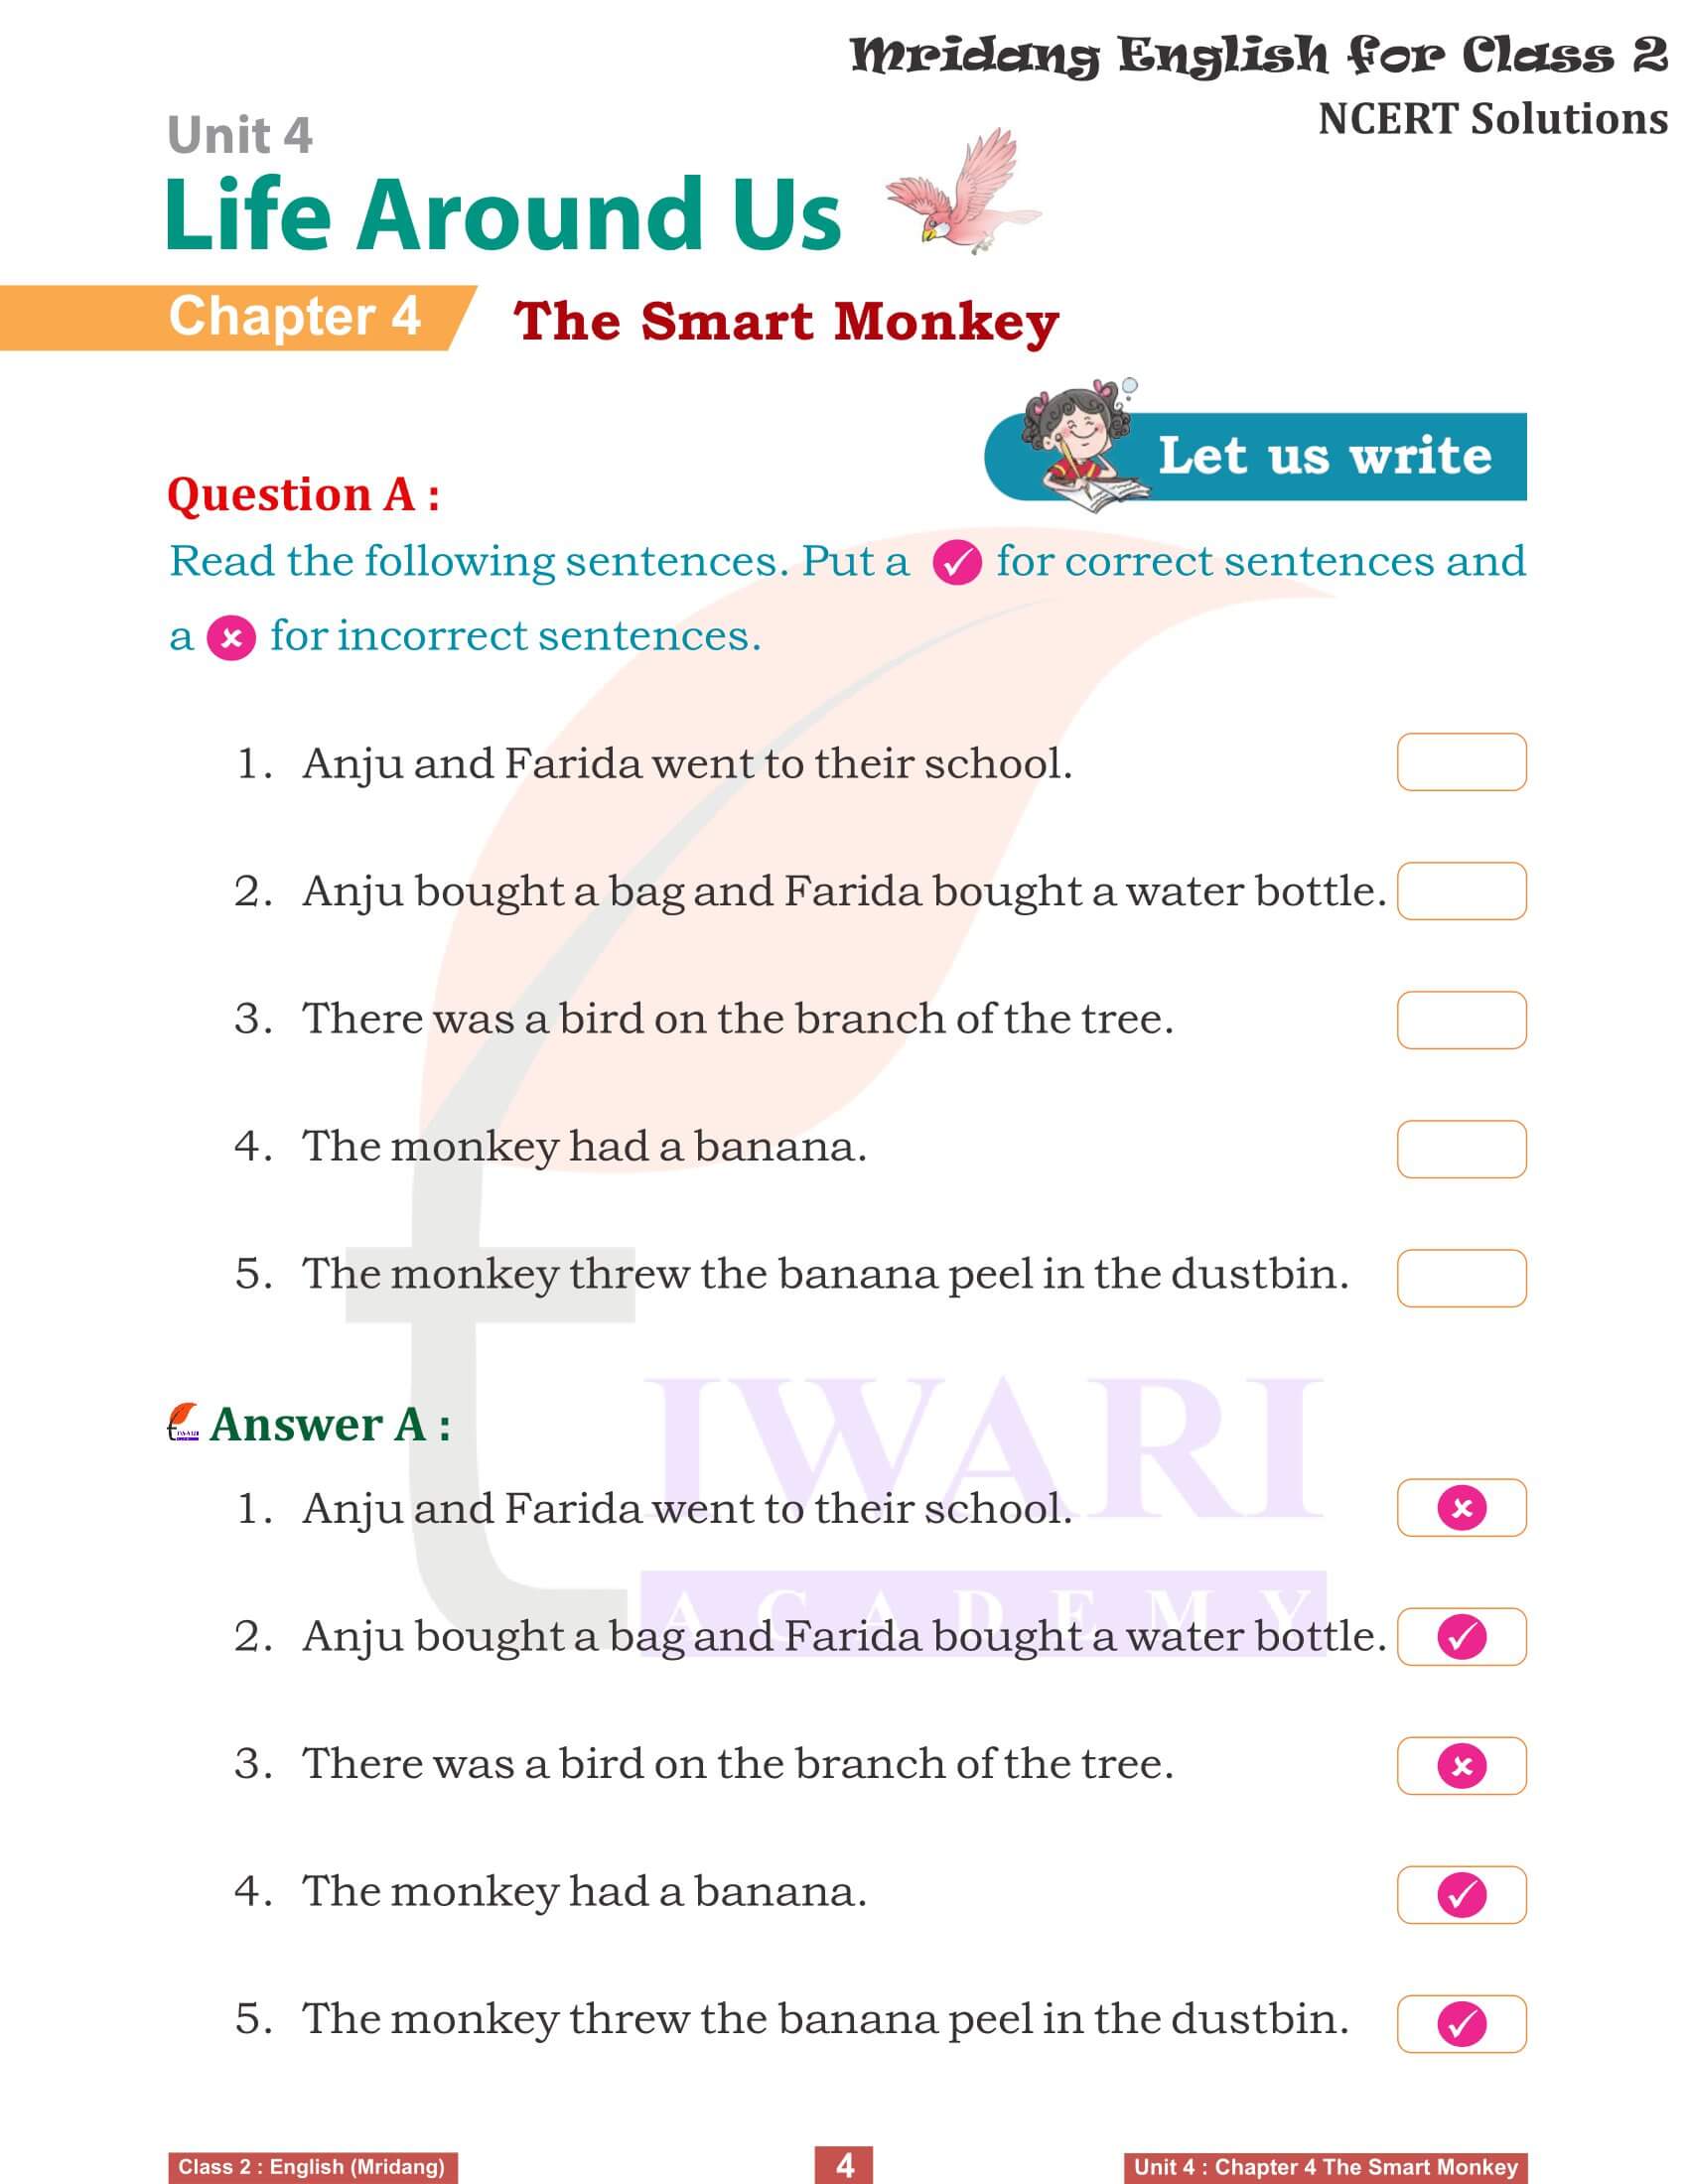 NCERT Solutions for Class 2 English Mridang Unit 4 Life Around Us Chapter 4